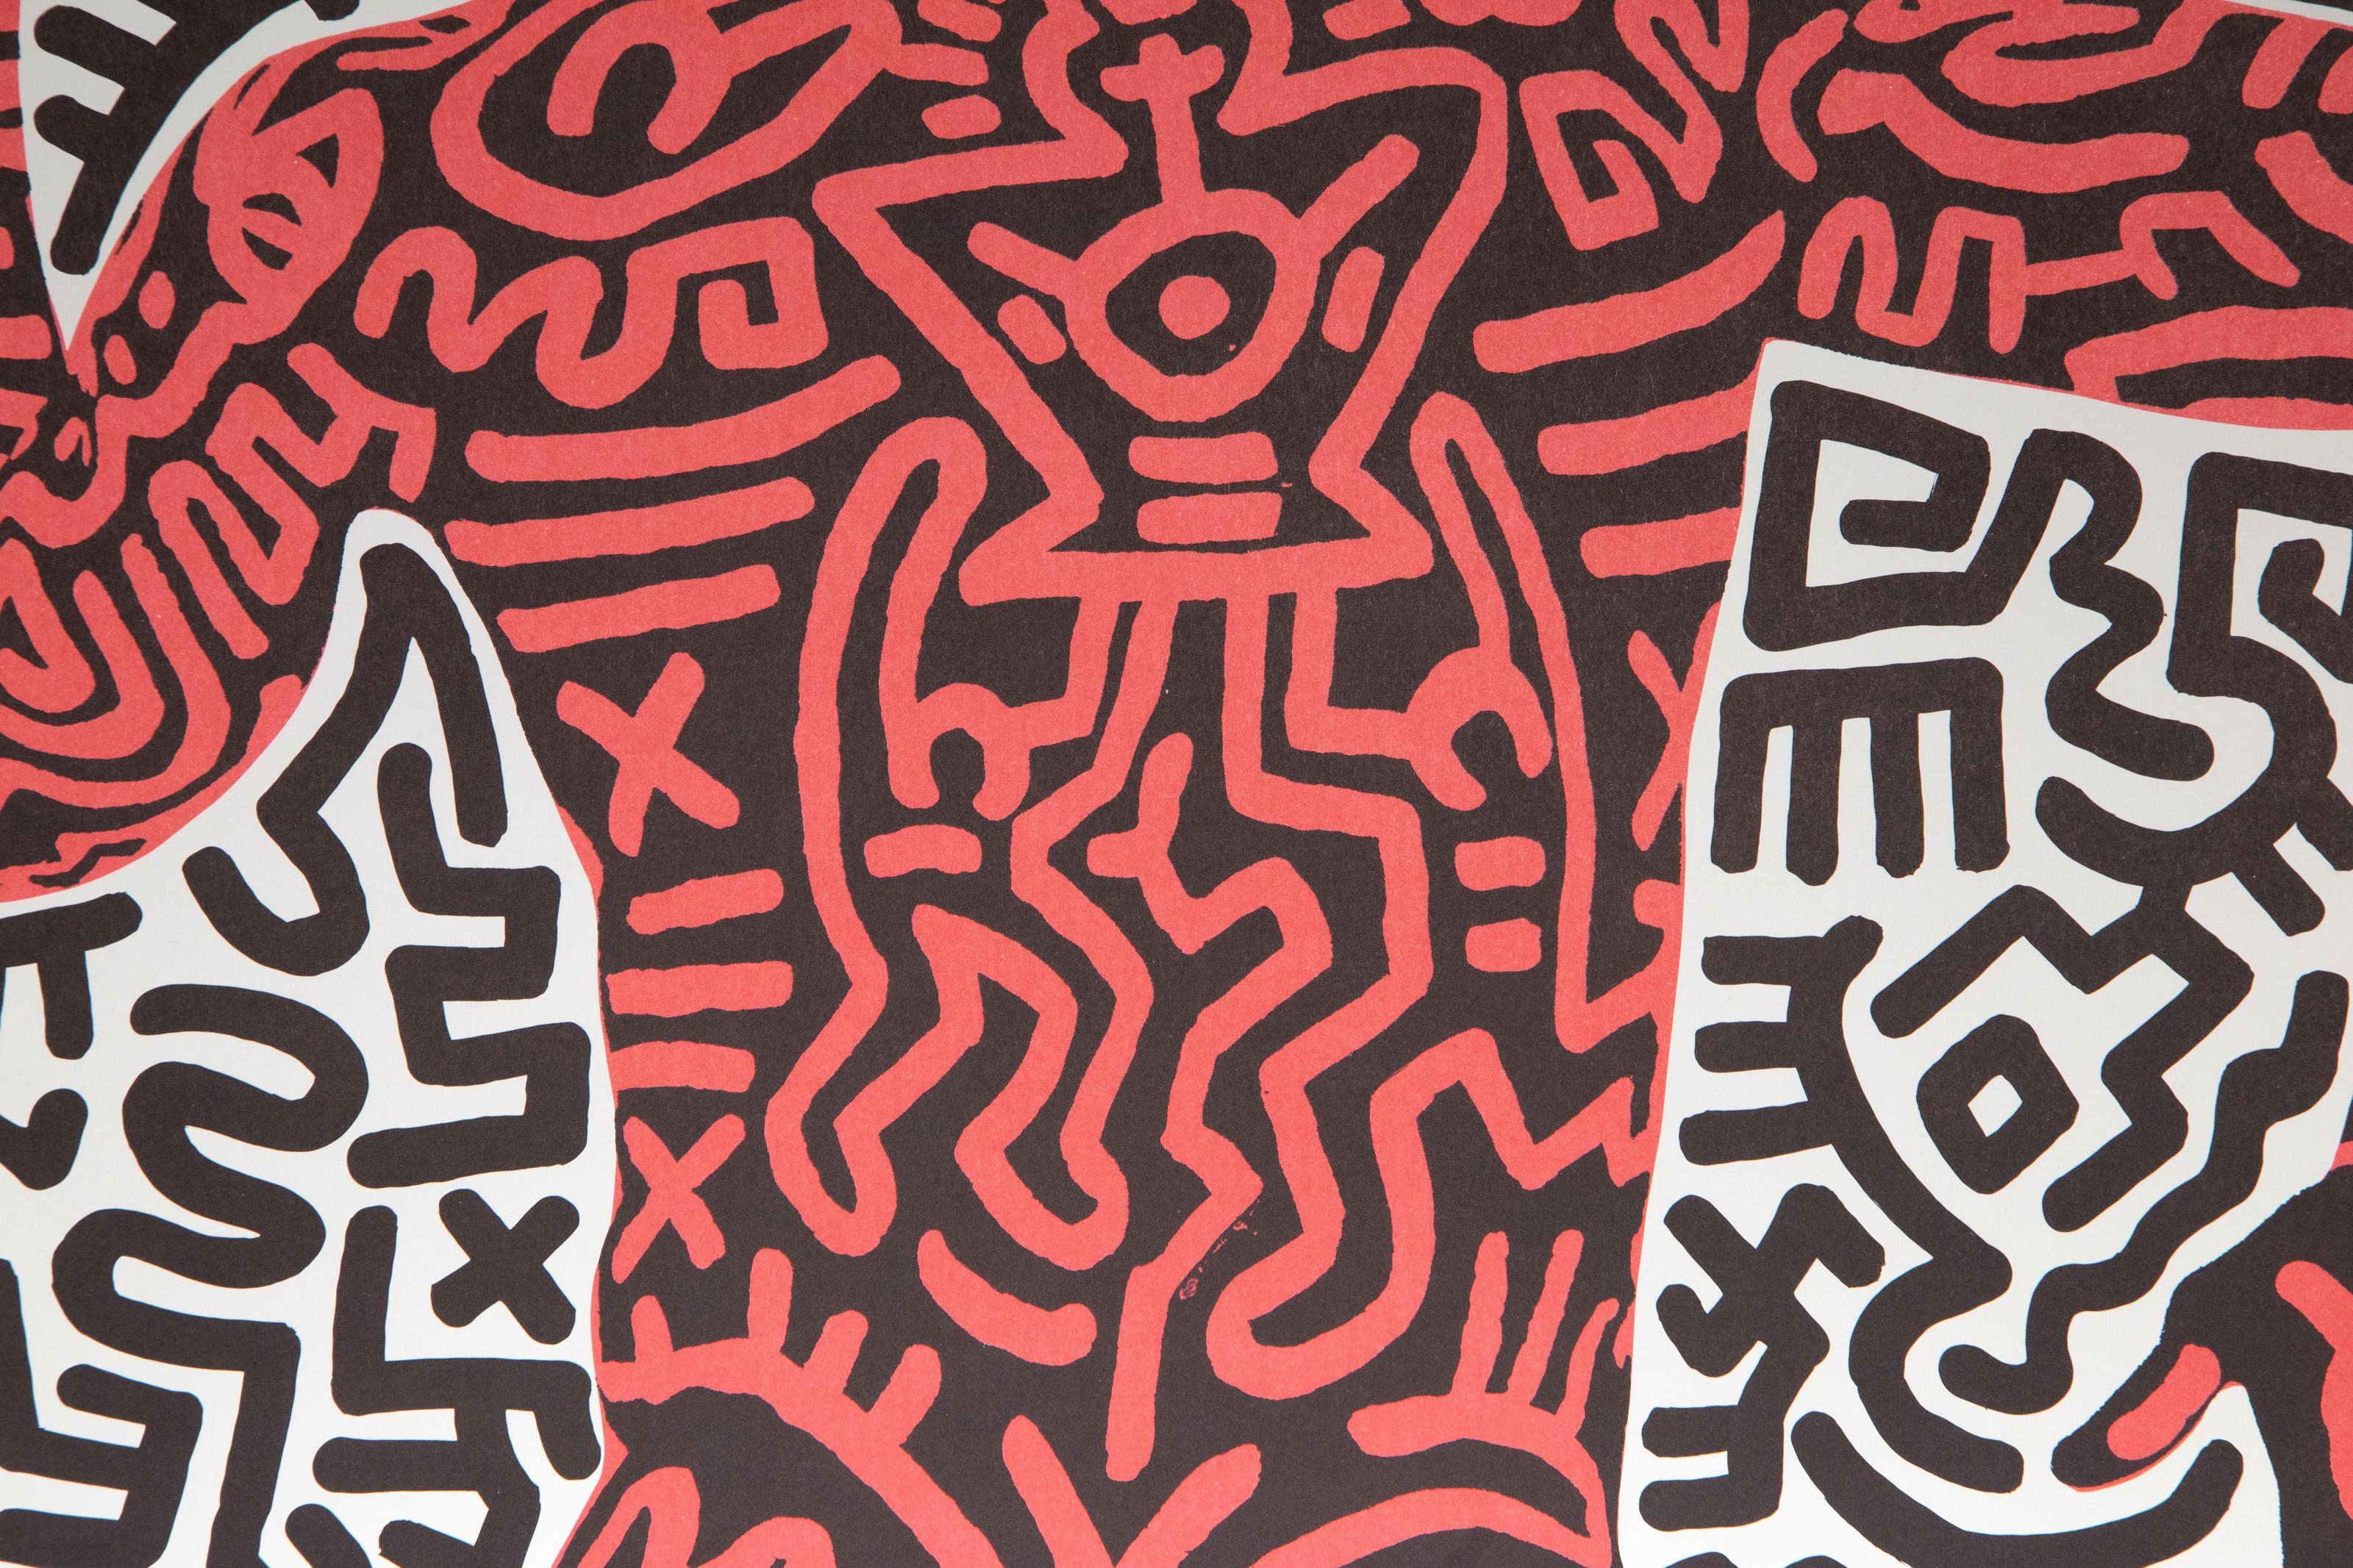 Into 84: Tony Shafrazi Gallery, Signed Exhibition Poster by Keith Haring For Sale 1